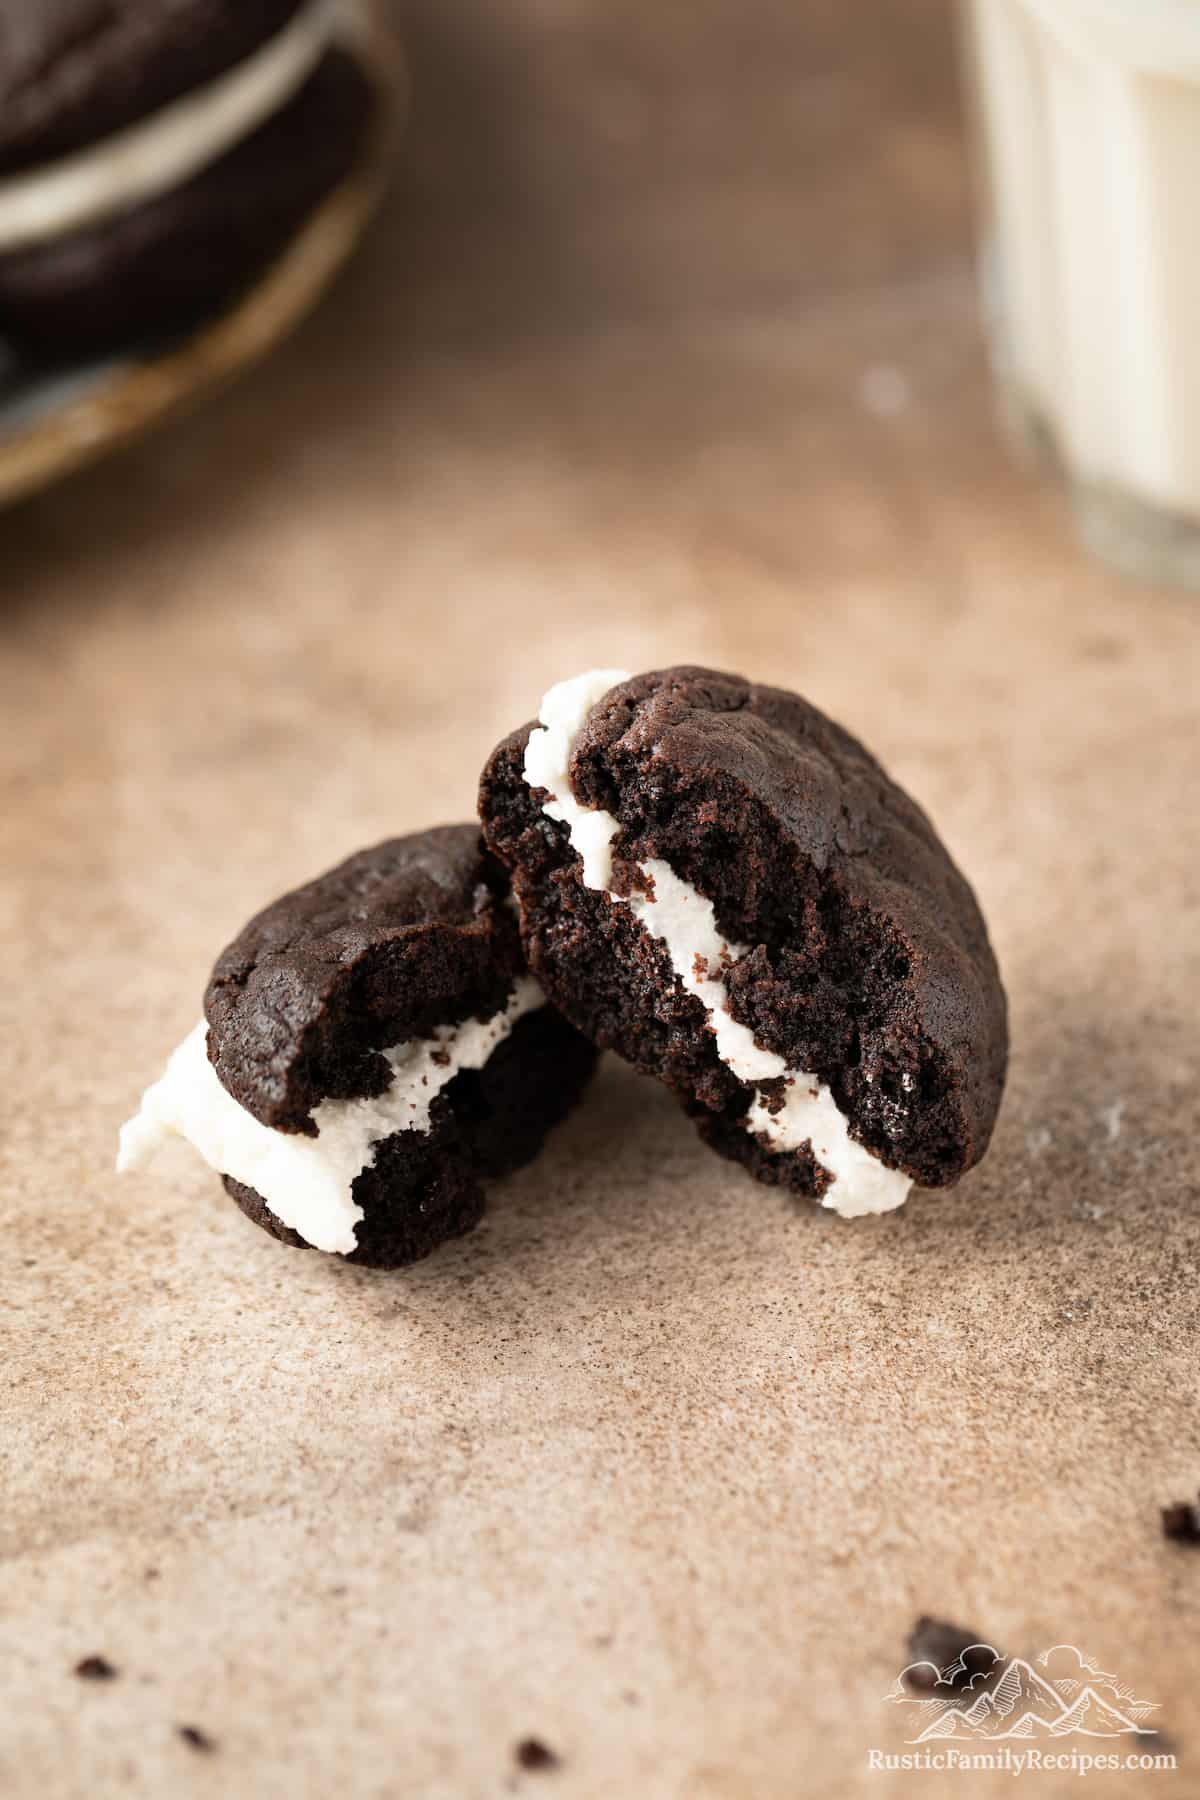 Two halves of an Oreo whoopie pie revealing the layers of chocolate cookie and vanilla cream filling.